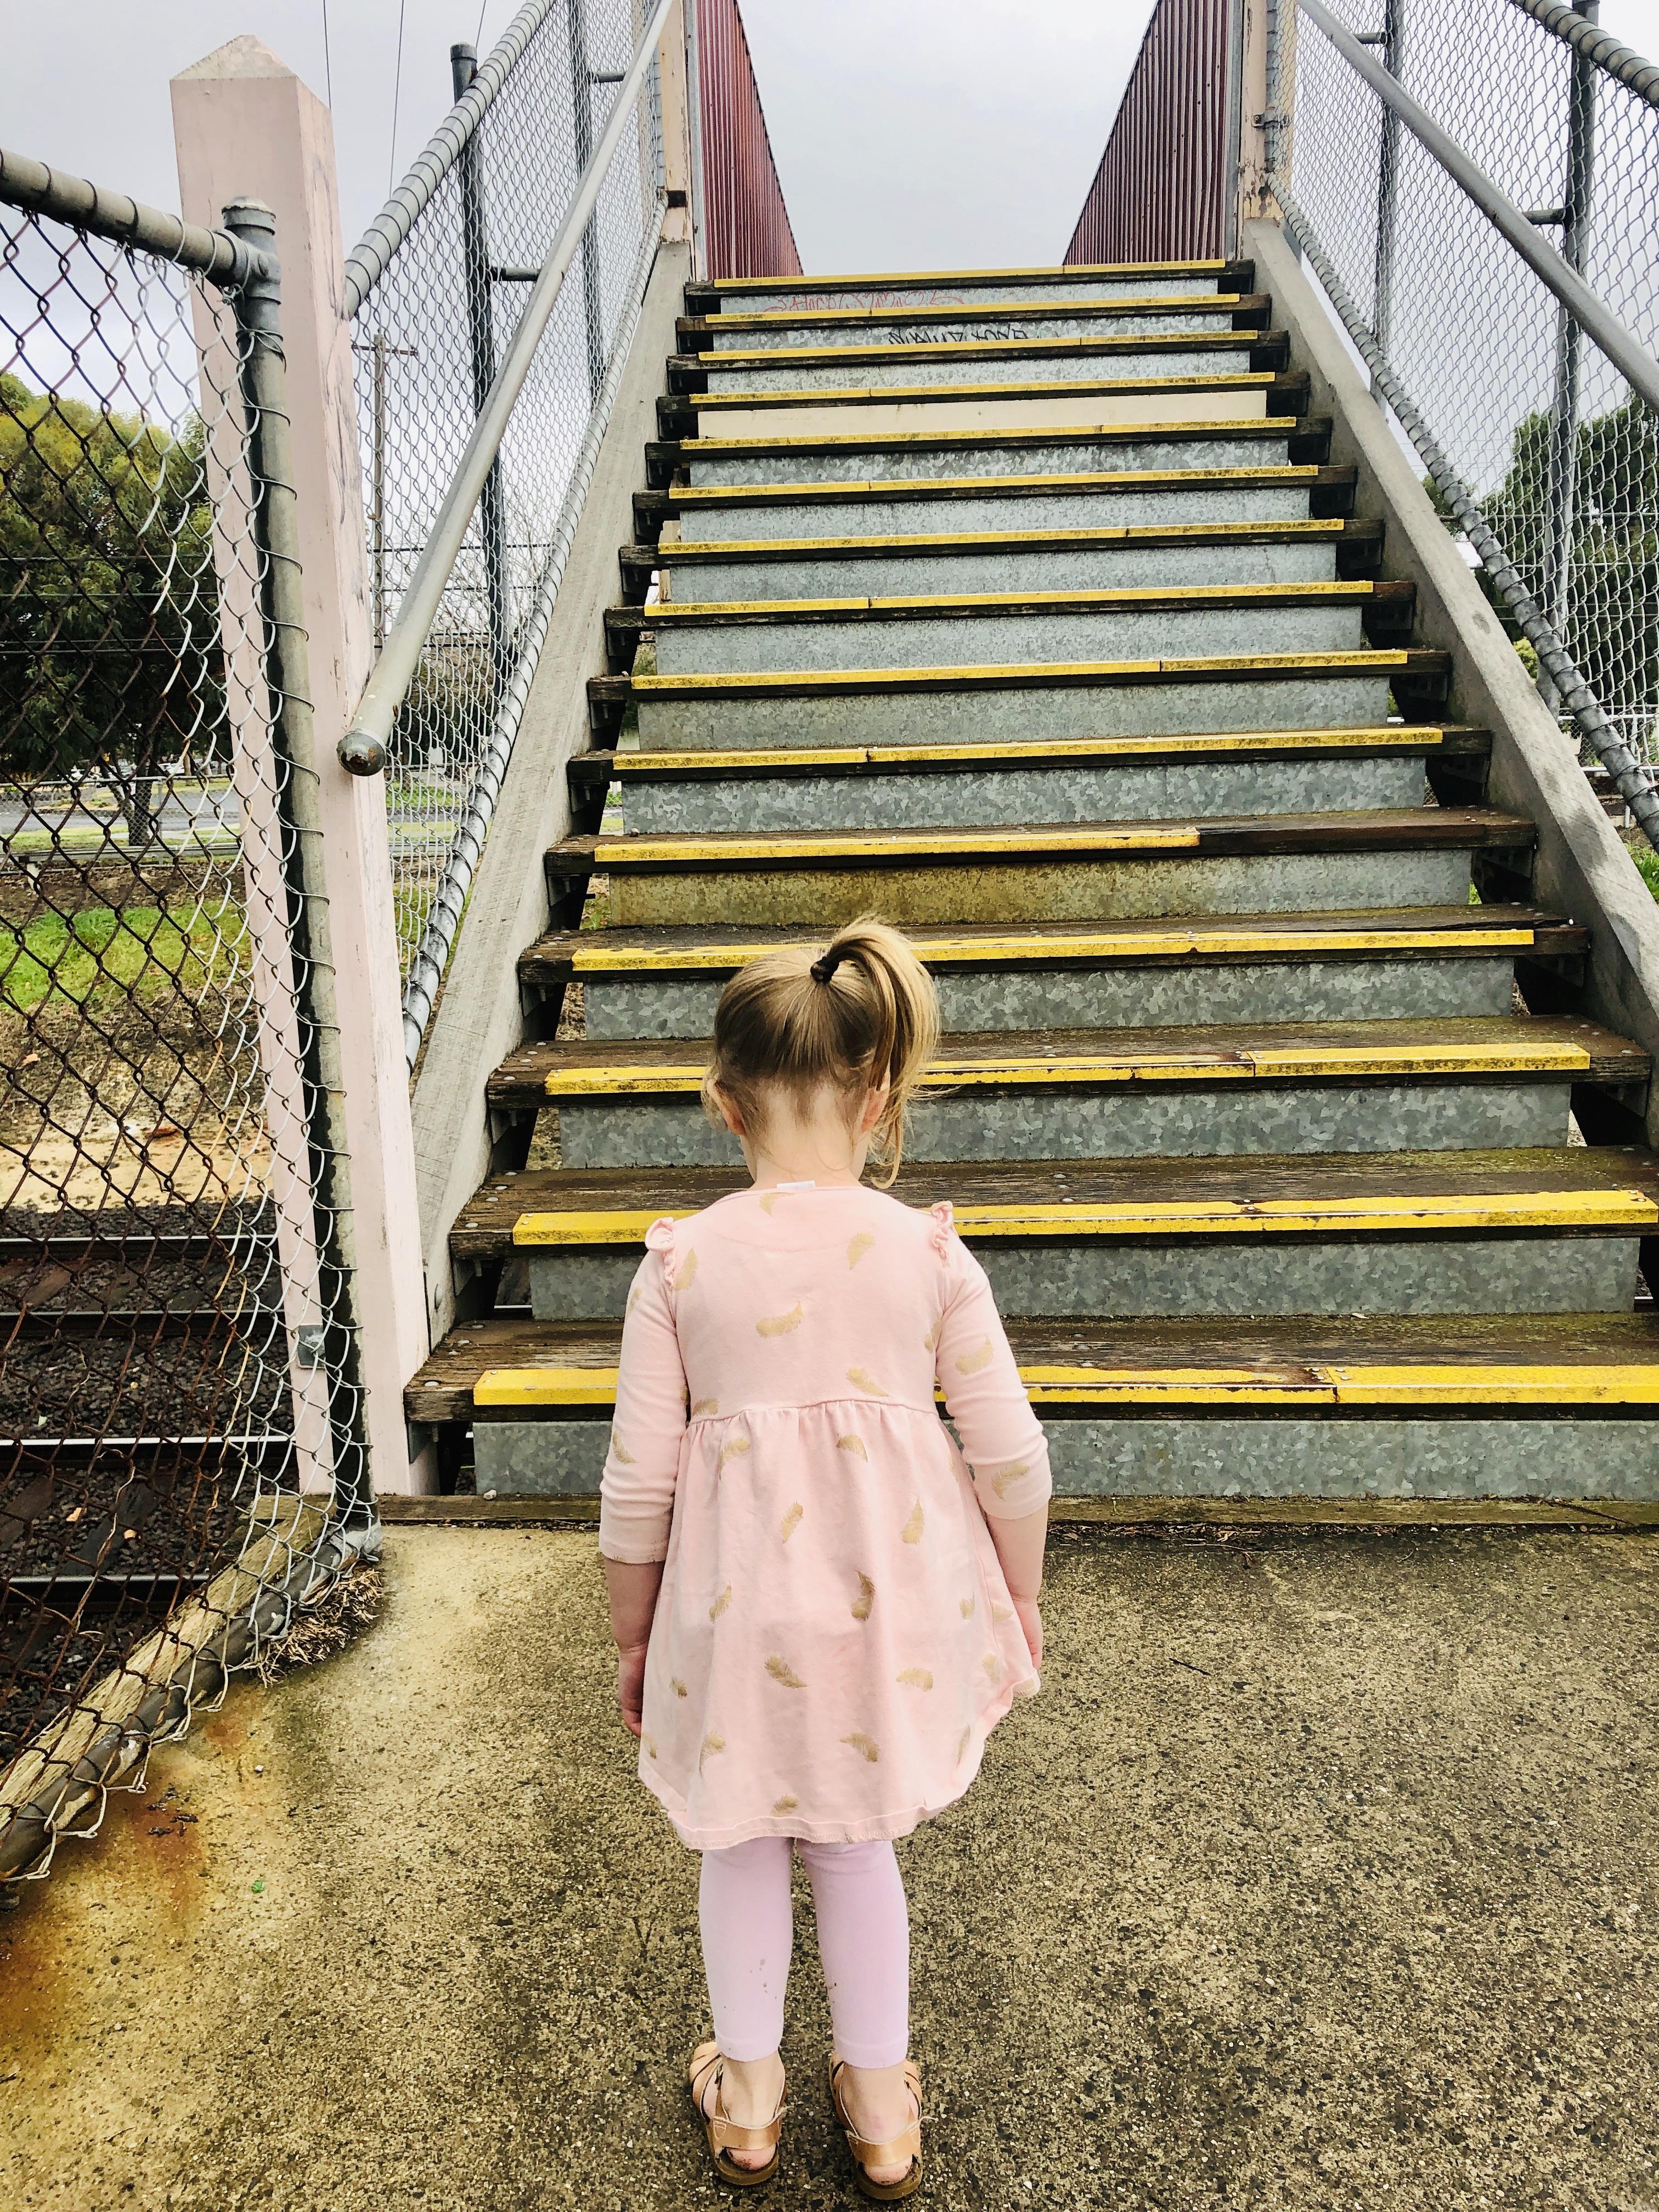 Girl counting stairs as she walks